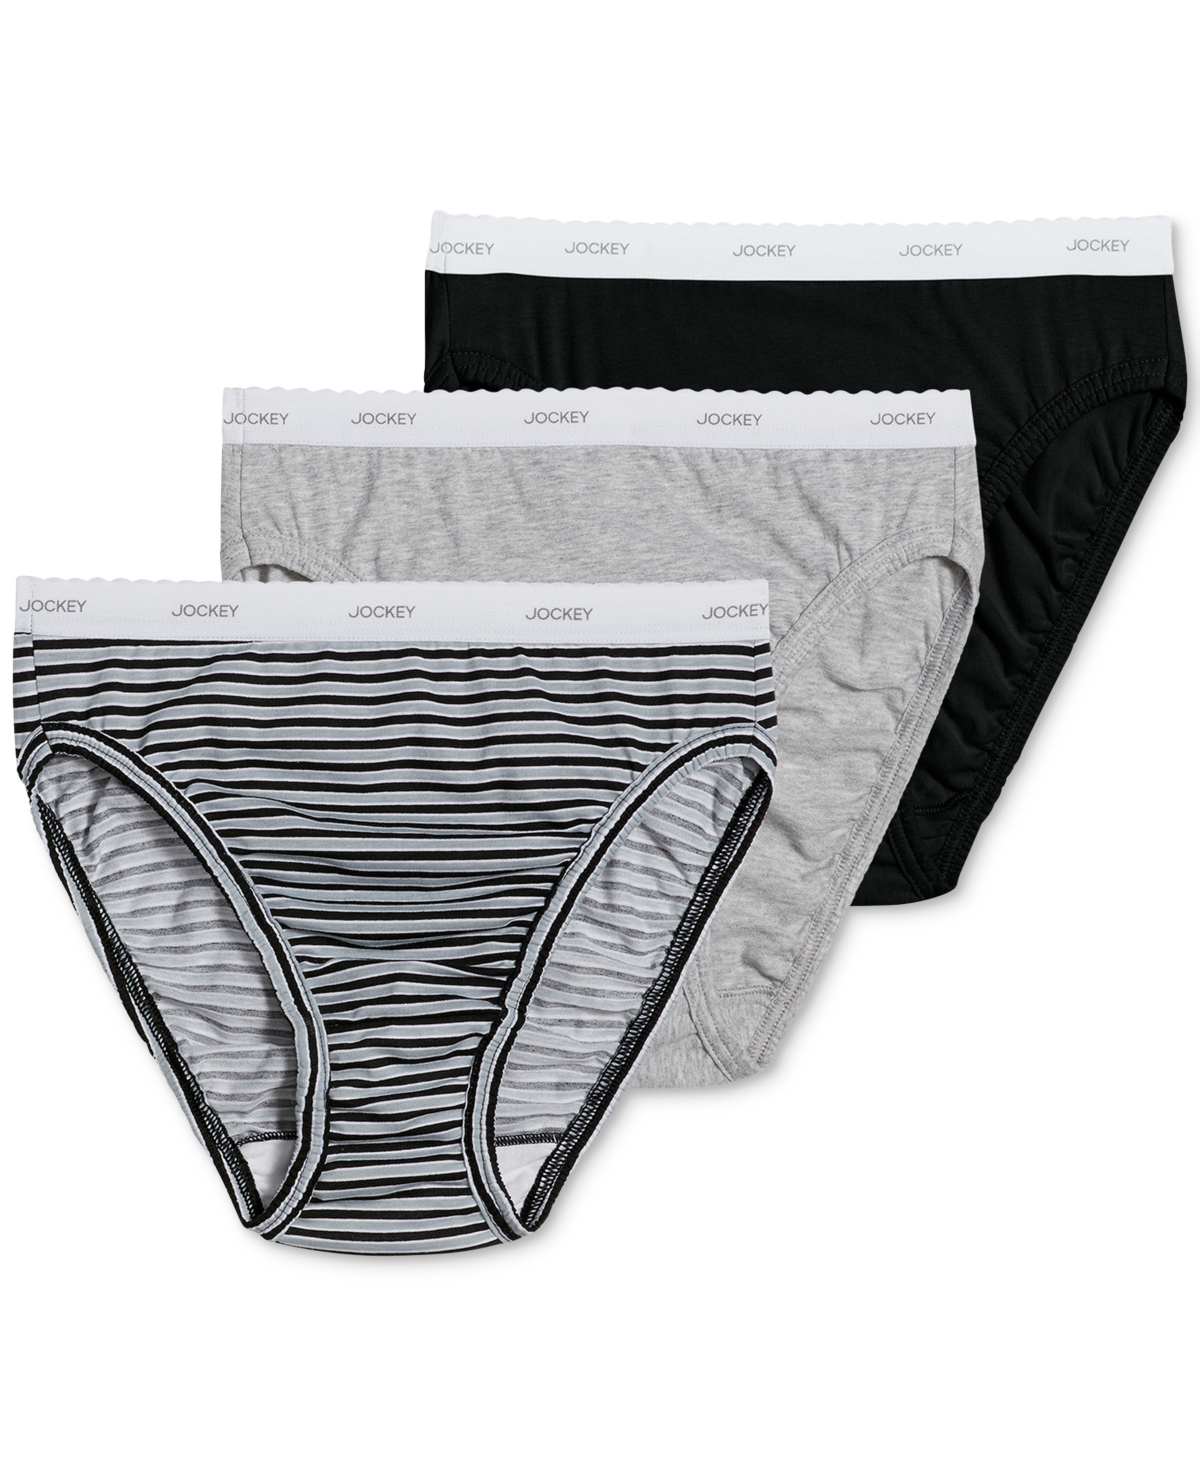 Classics French Cut Underwear 3 Pack 9480, 9481, Extended Sizes - White